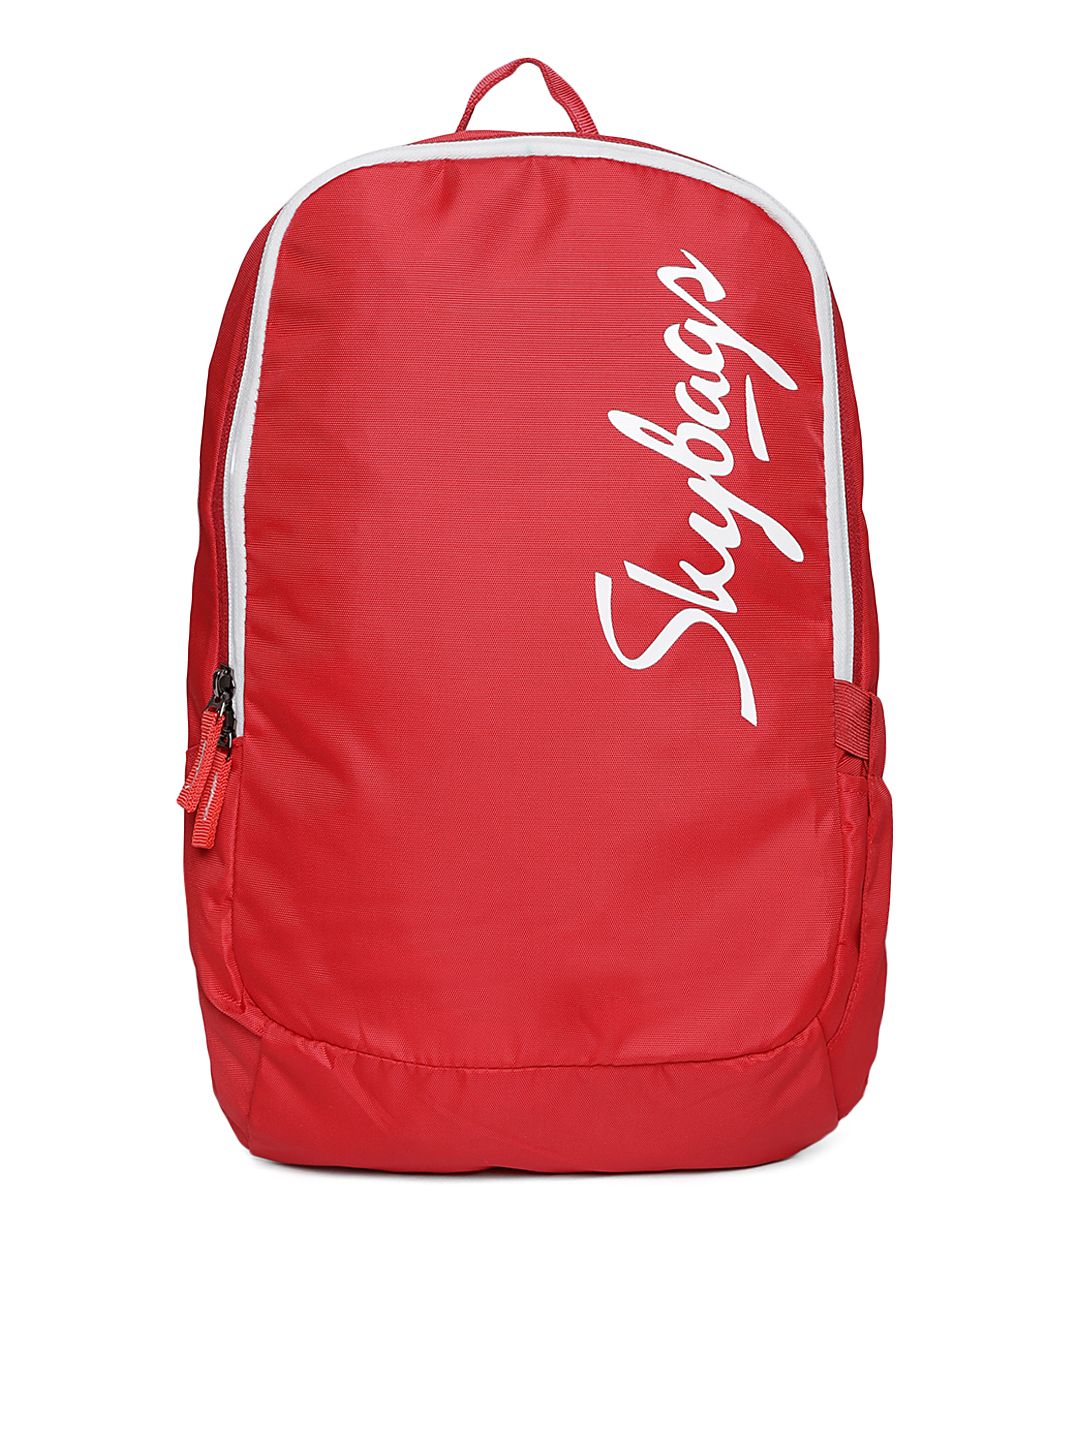 Skybags Unisex Red Brand Logo Backpack Price in India